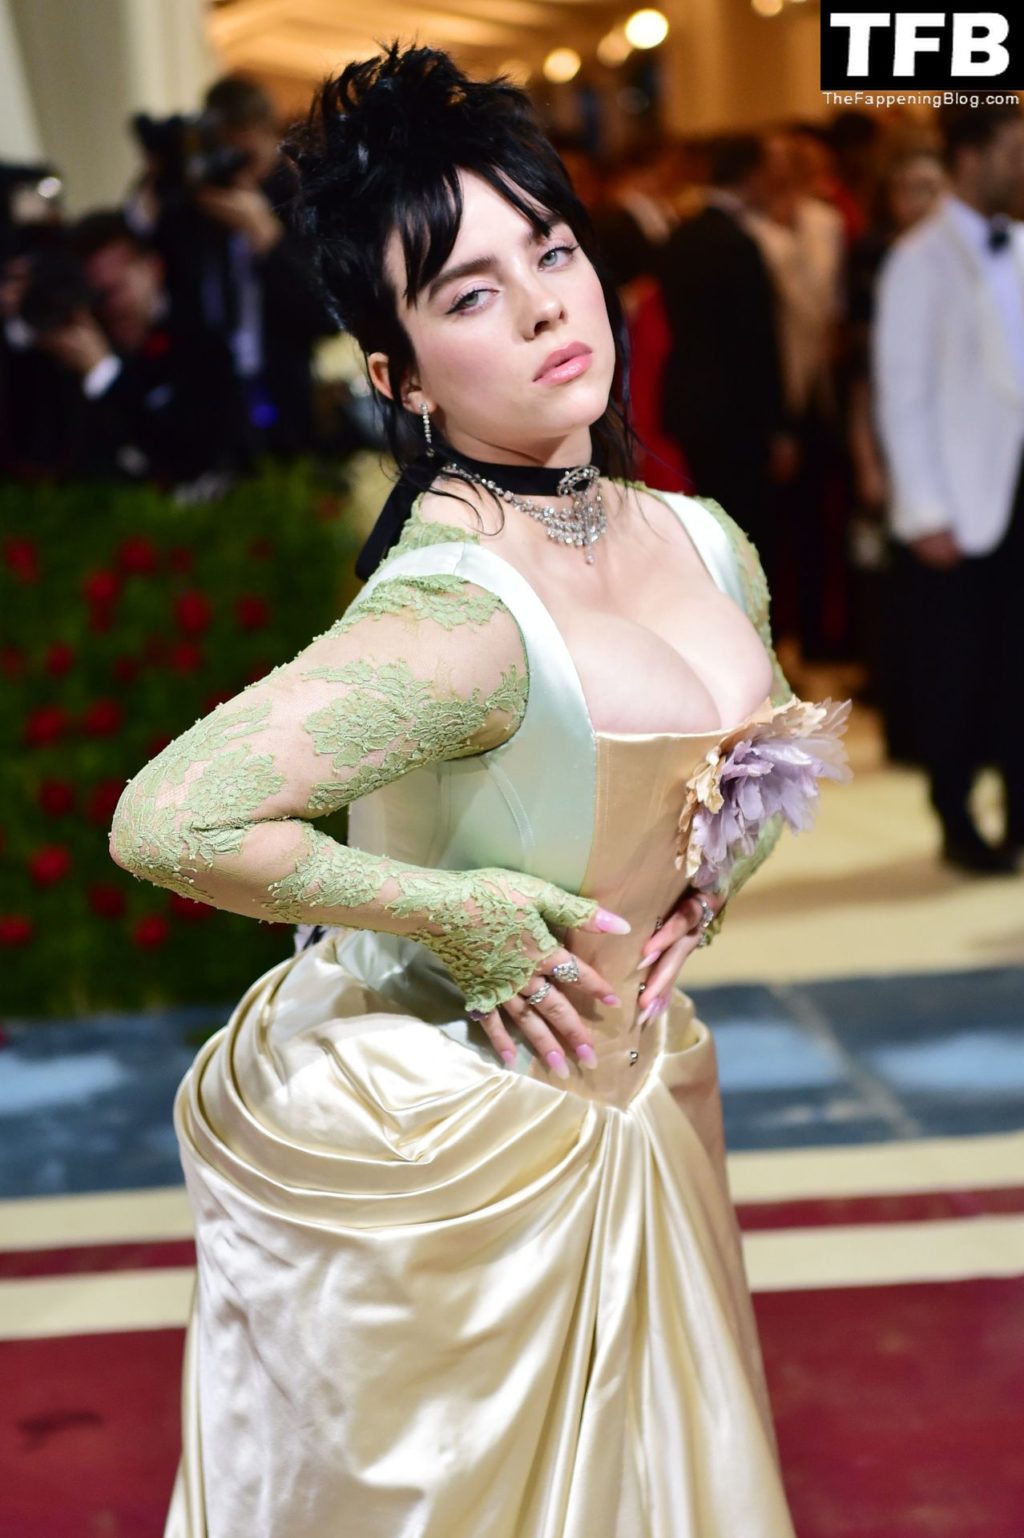 Billie Eilish Sexy The Fappening Blog 132 1024x1538 - Billie Eilish Showcases Nice Cleavage at The 2022 Met Gala in NYC (155 Photos)